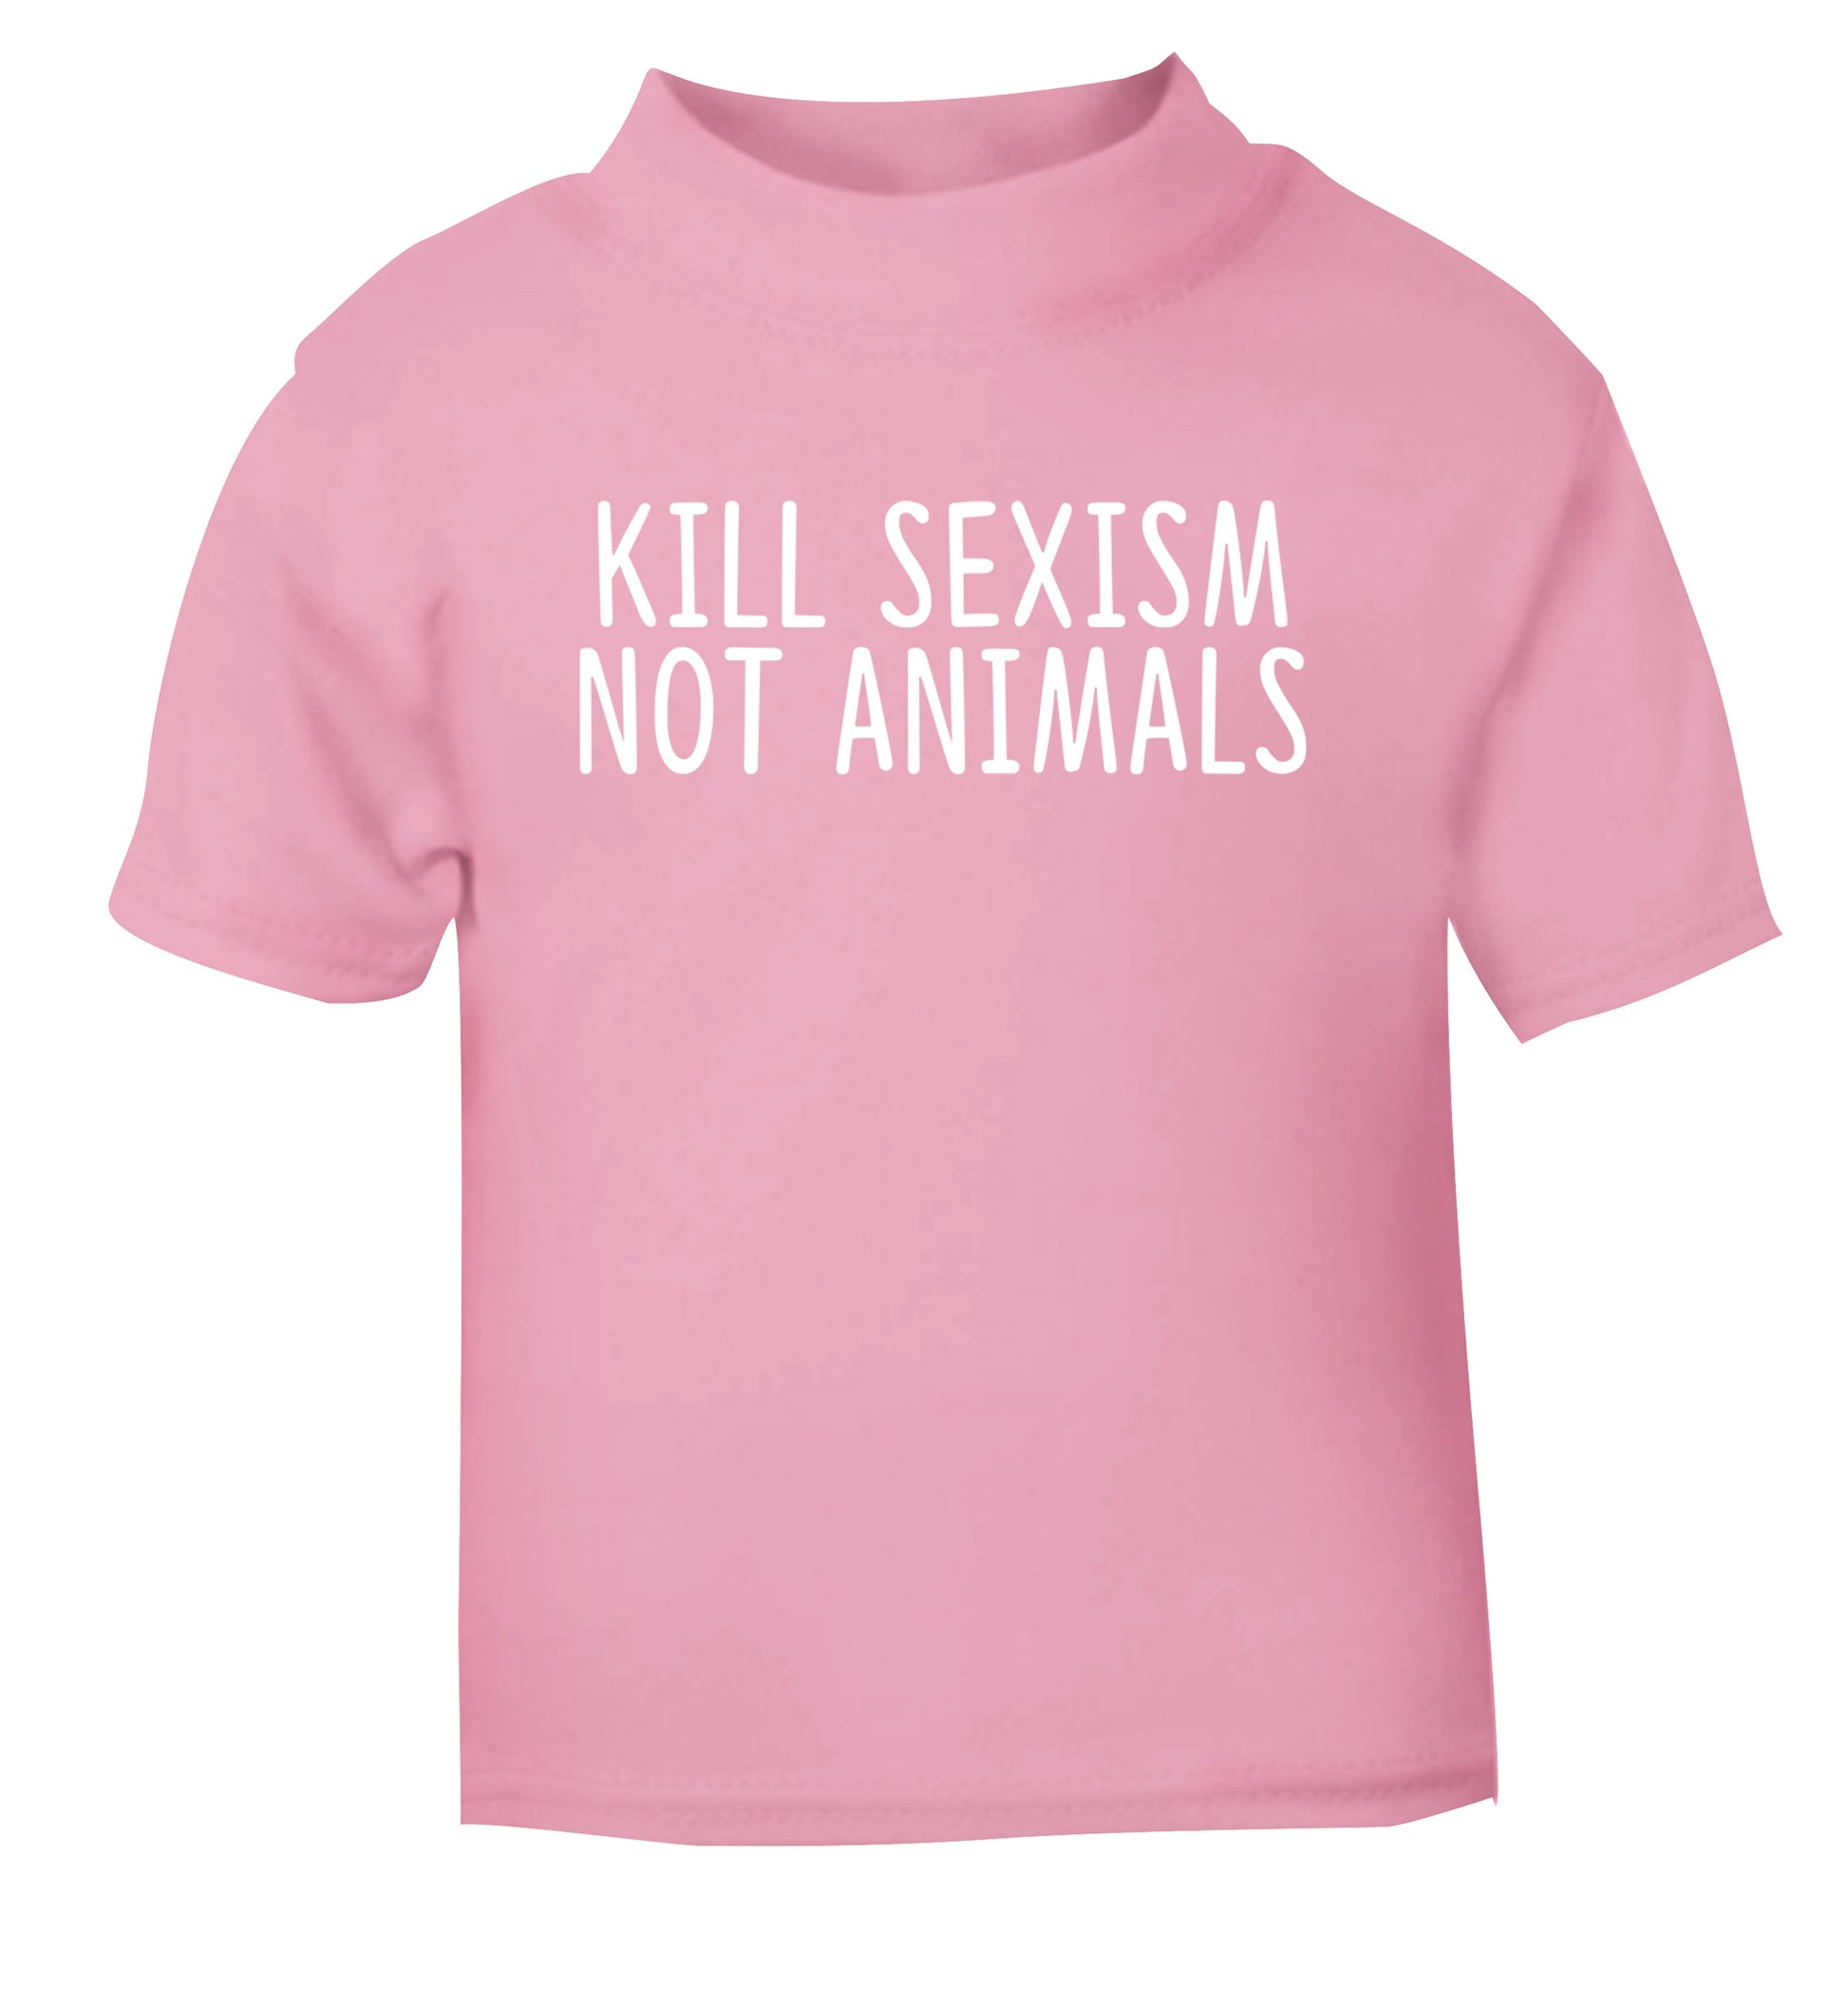 Kill Sexism Not Animals light pink Baby Toddler Tshirt 2 Years